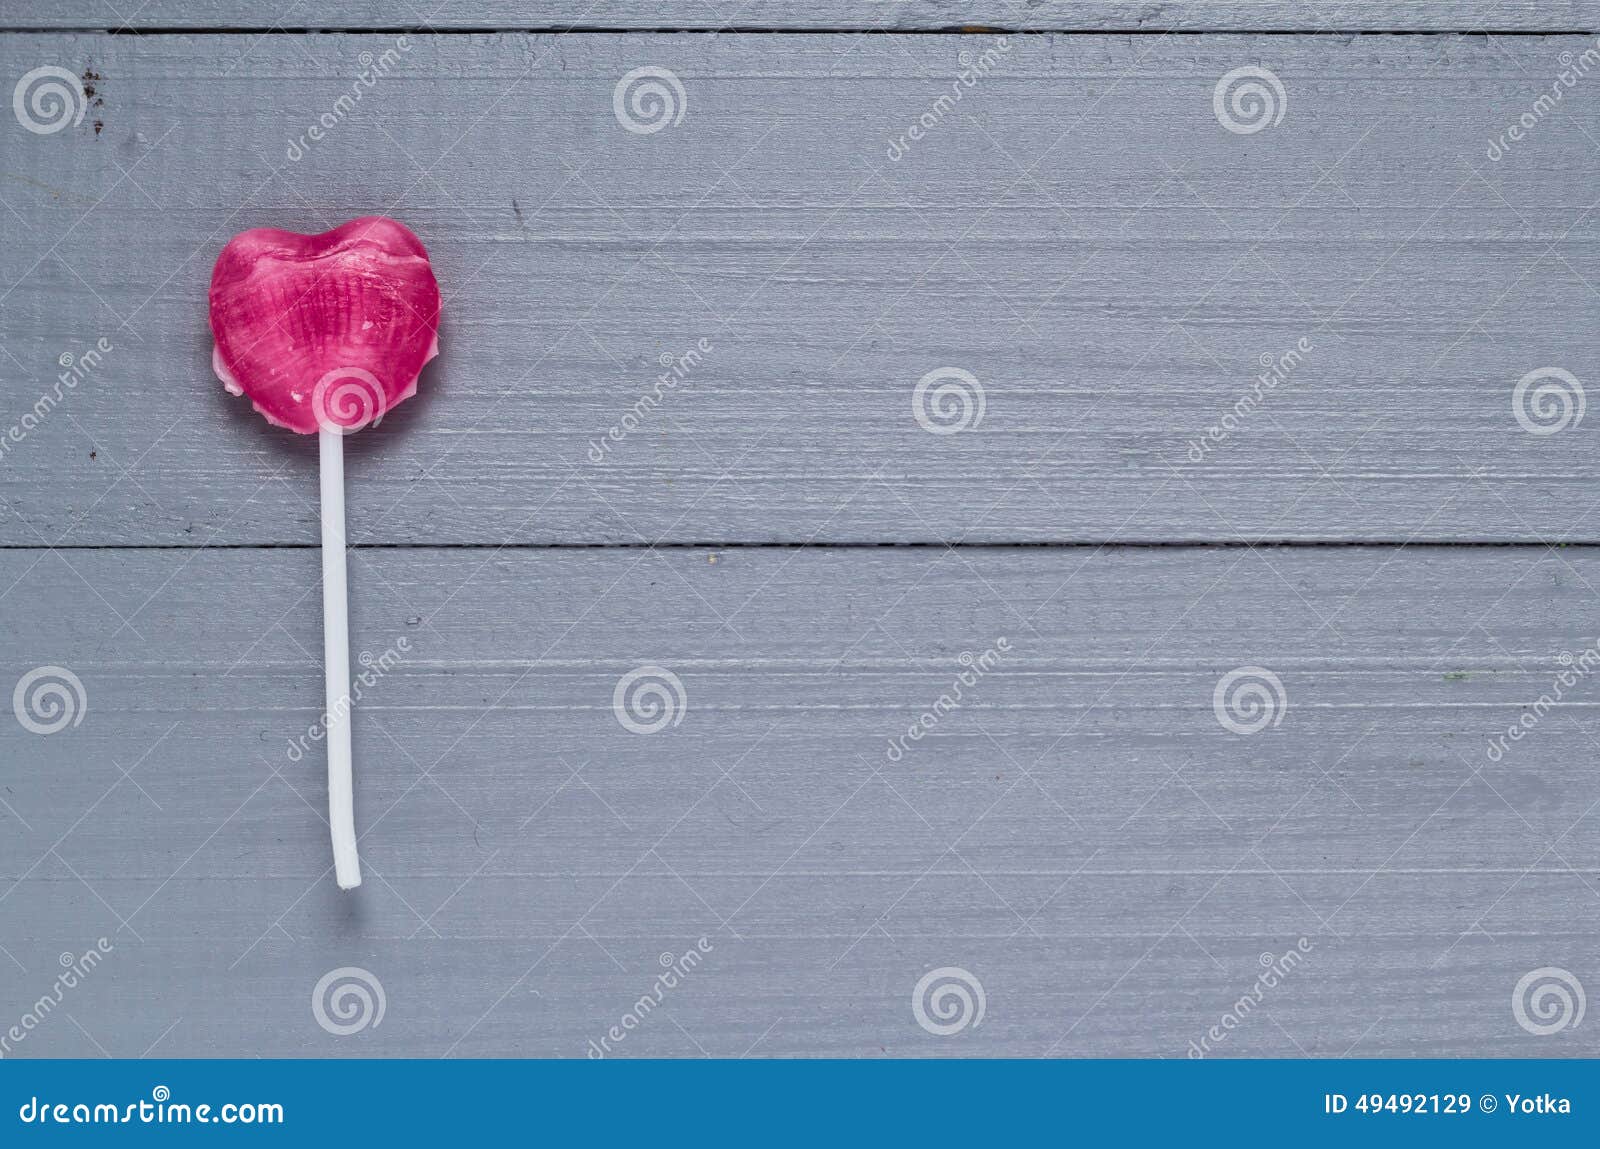 Pink Heart Shaped Lollipop Gray Boards Stock Image - Image of design, class...